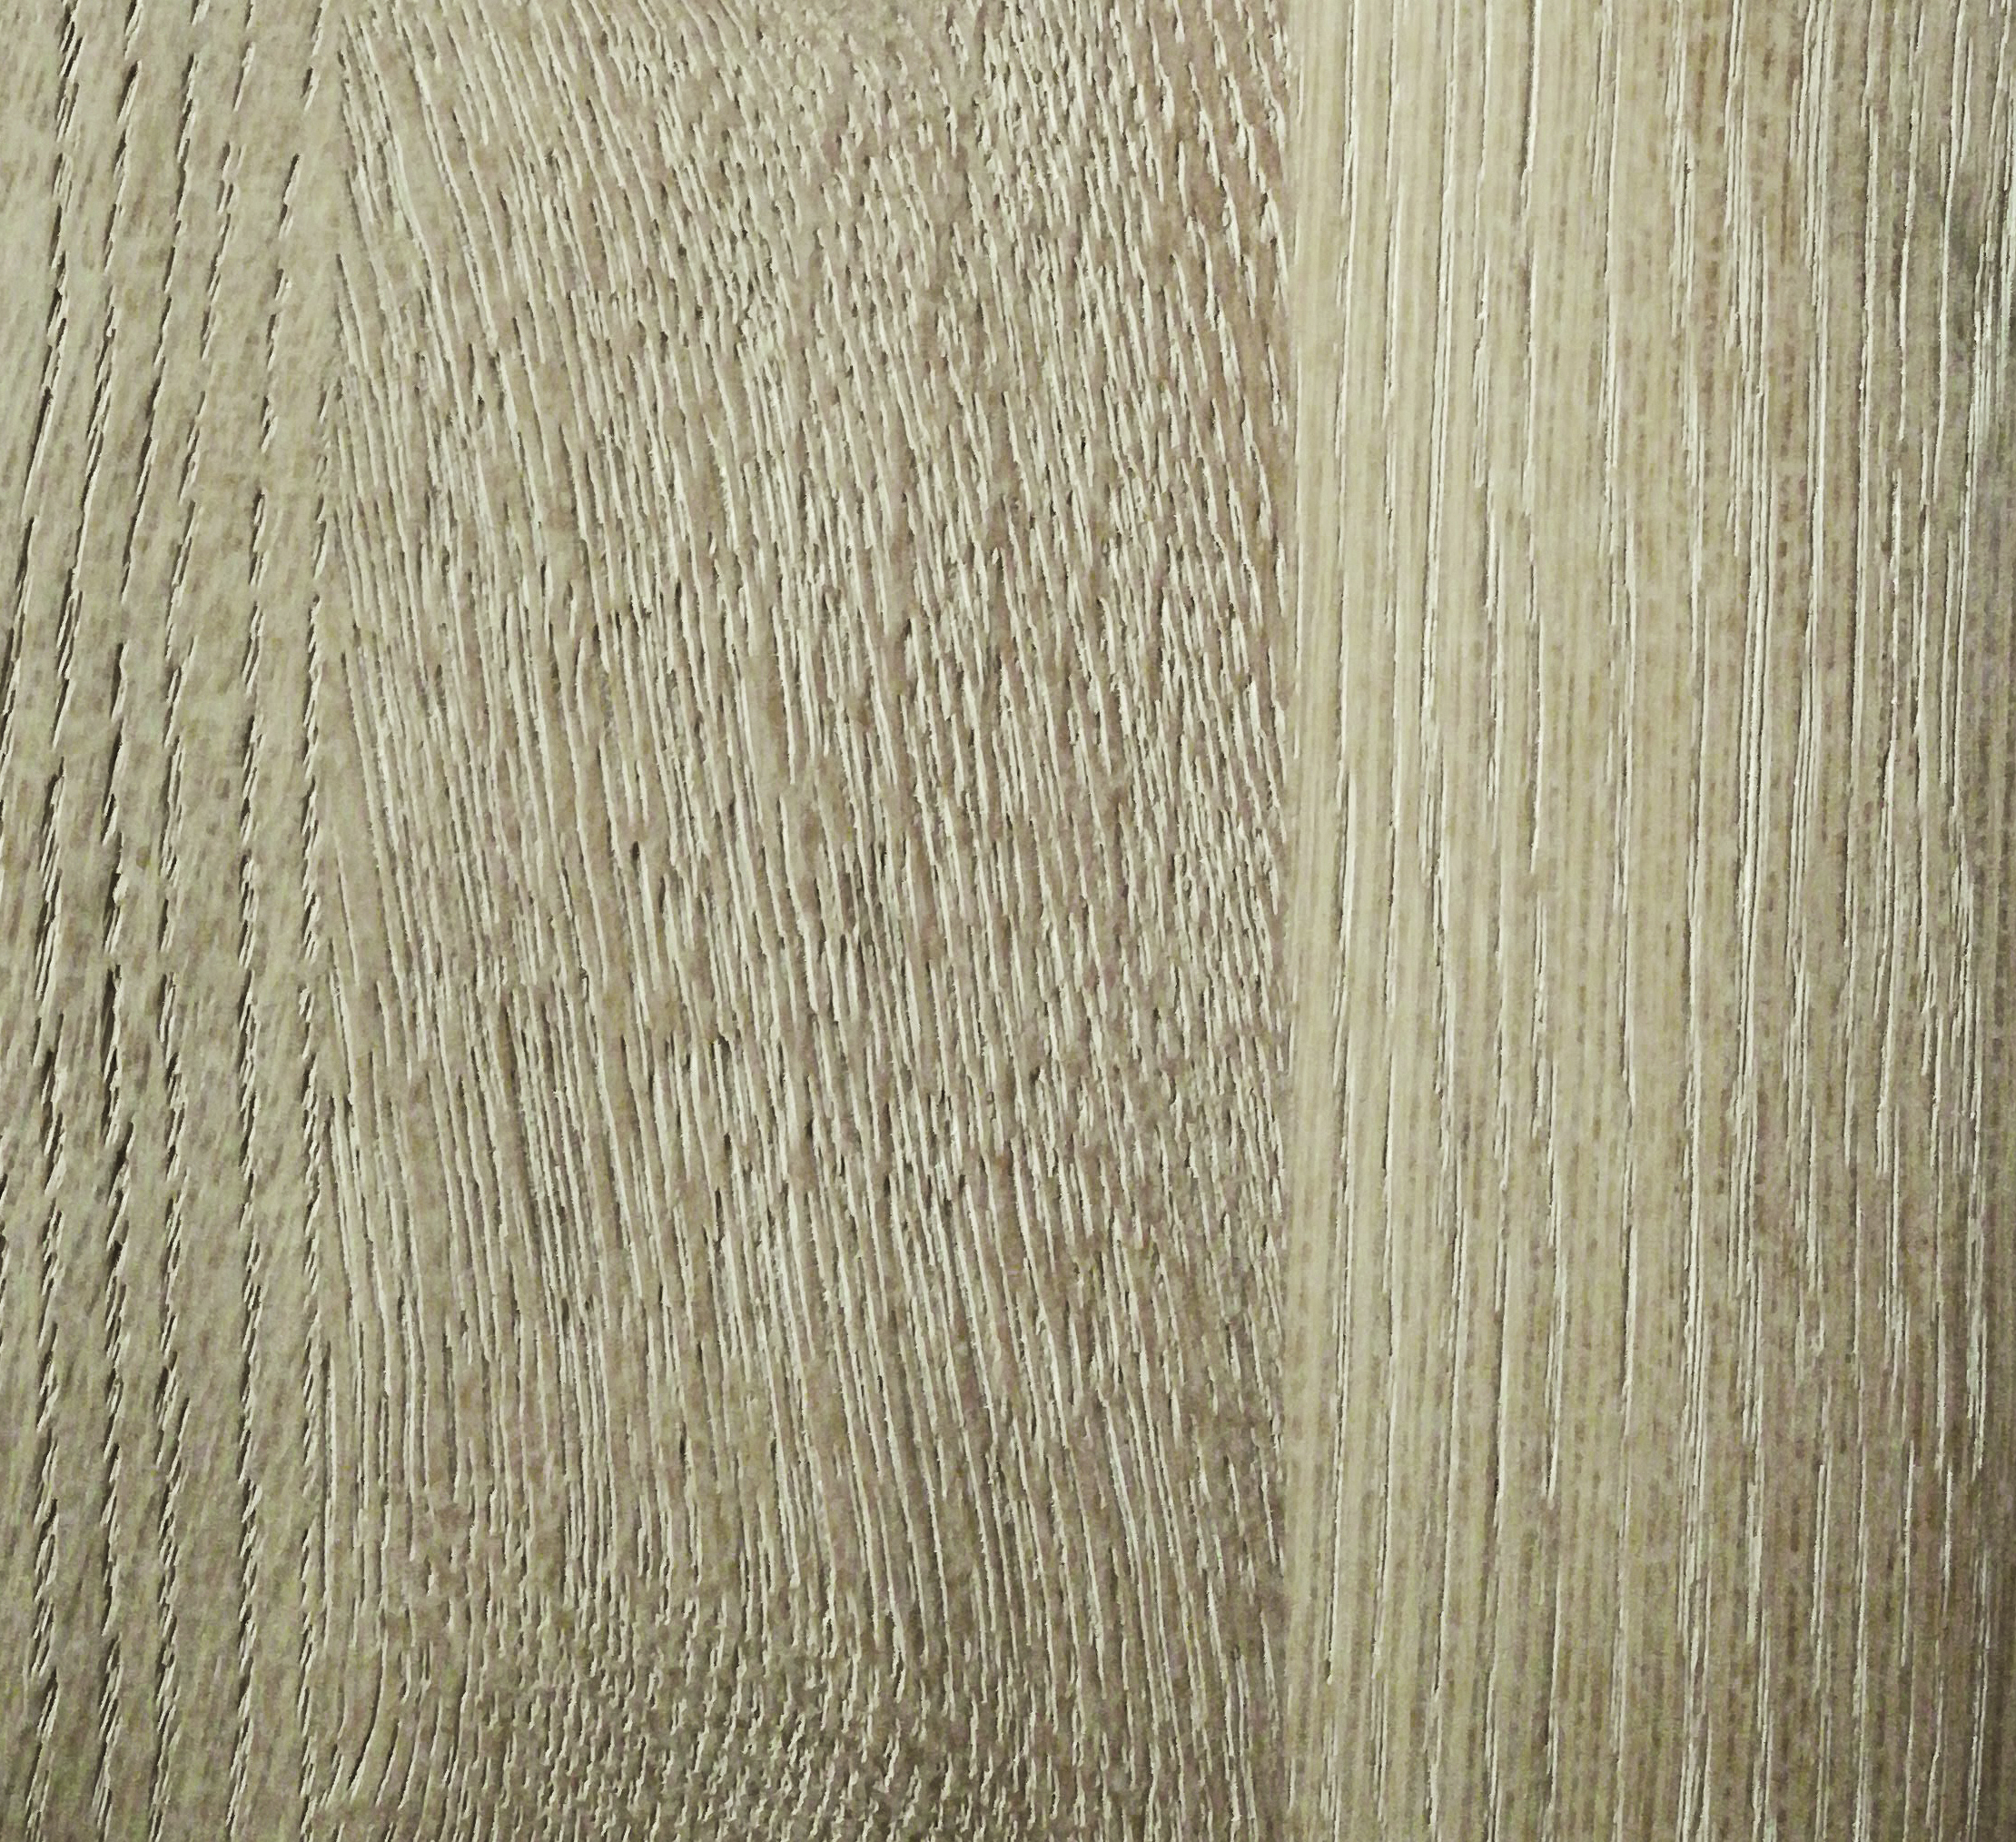 A4 - OAK WITHOUT KNOTS PIGMENTED WHITE MILK